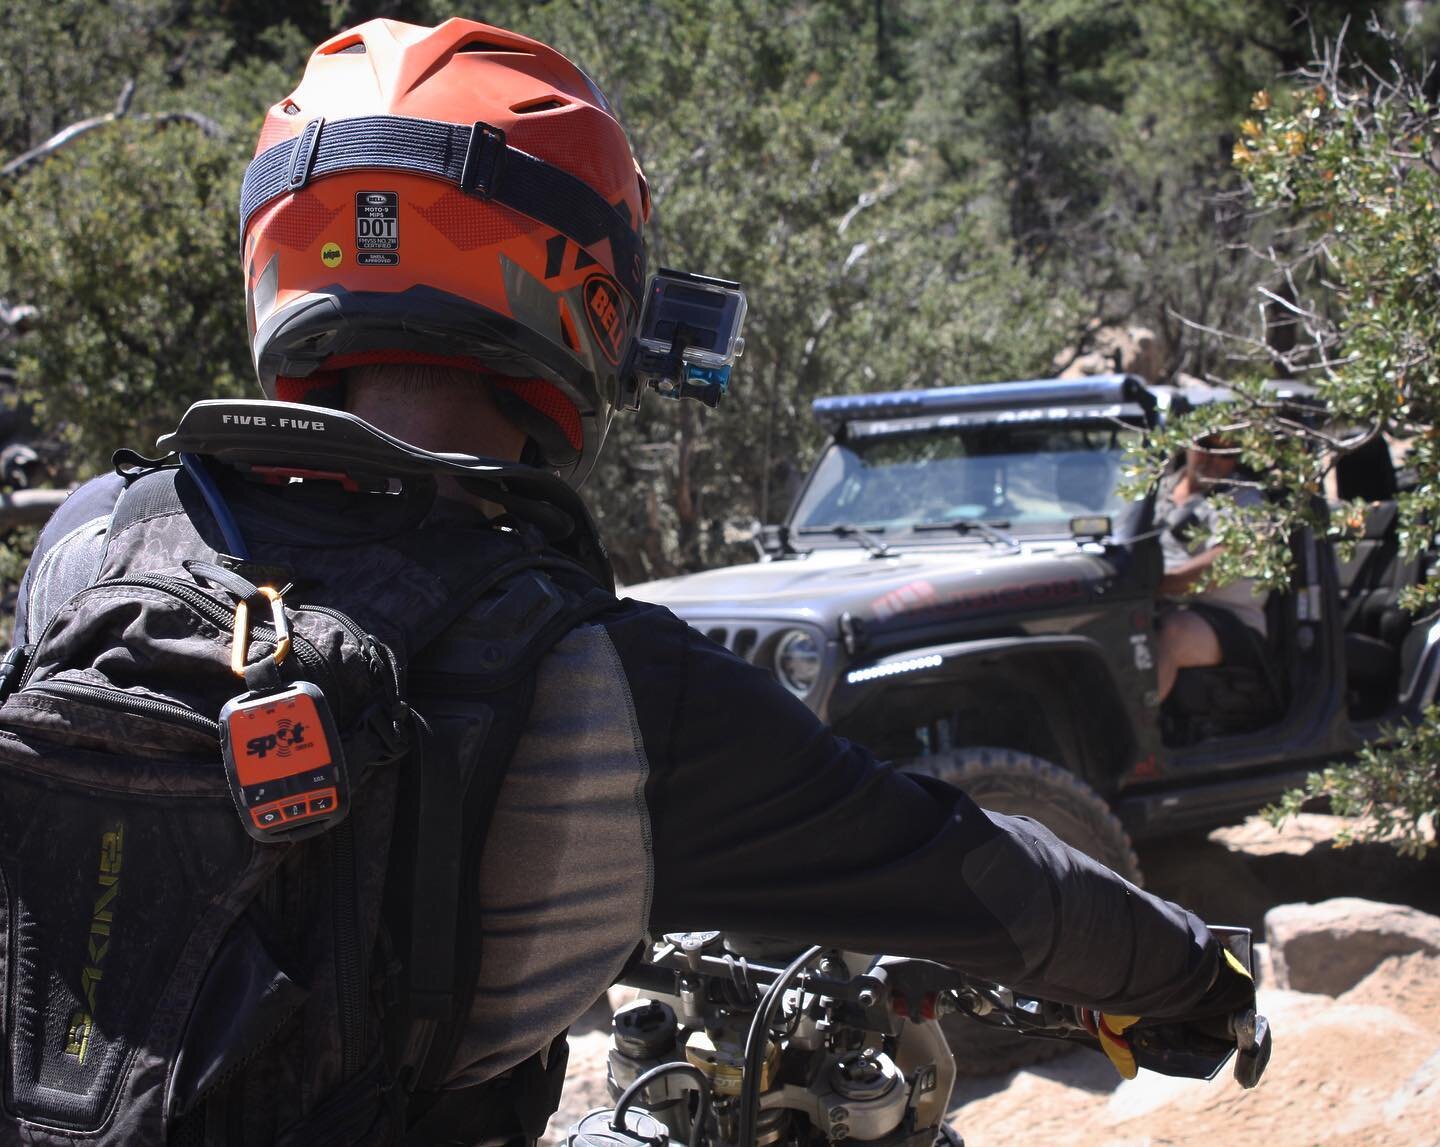 4 wheels is not the only way to get some Trail Therapy. Did you know that half of our TTO team rides moto? 🏁 

~~~

Trail Therapy Offroad is a 501(c)(3) organization who empowers Disabled Veterans and their families through offroad knowledge, skill 